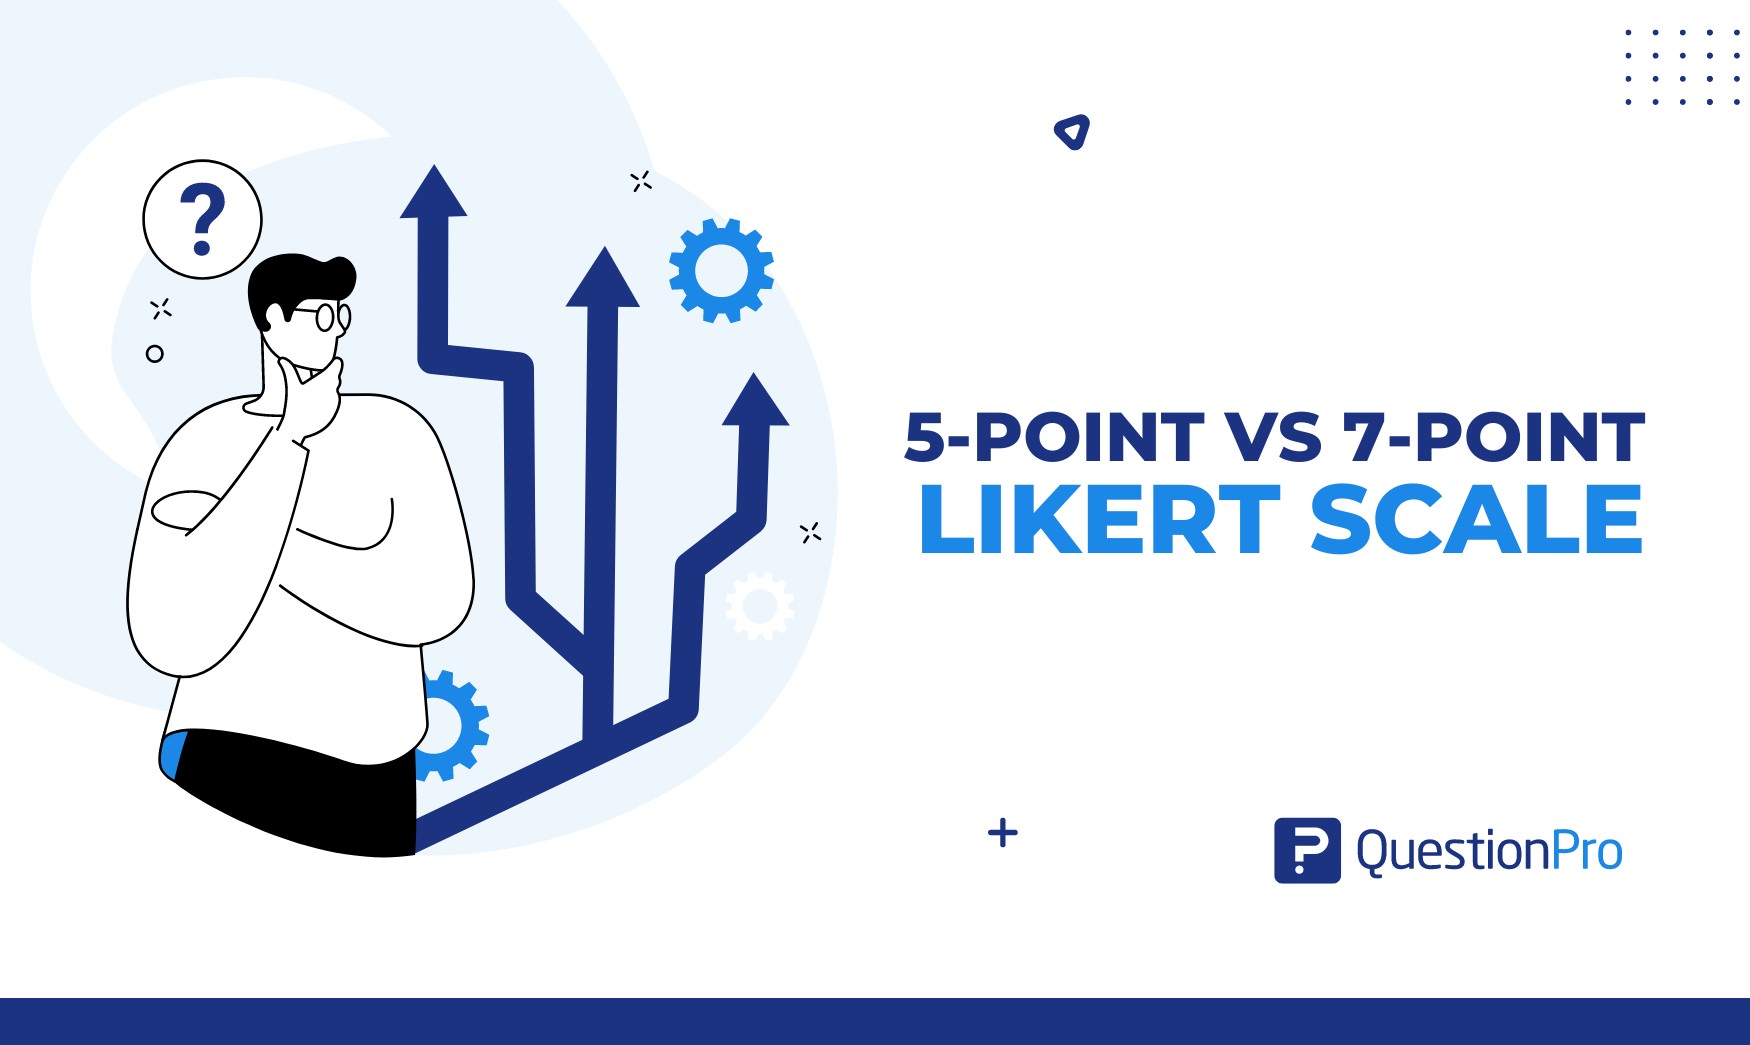 5-point vs 7-point Likert scale